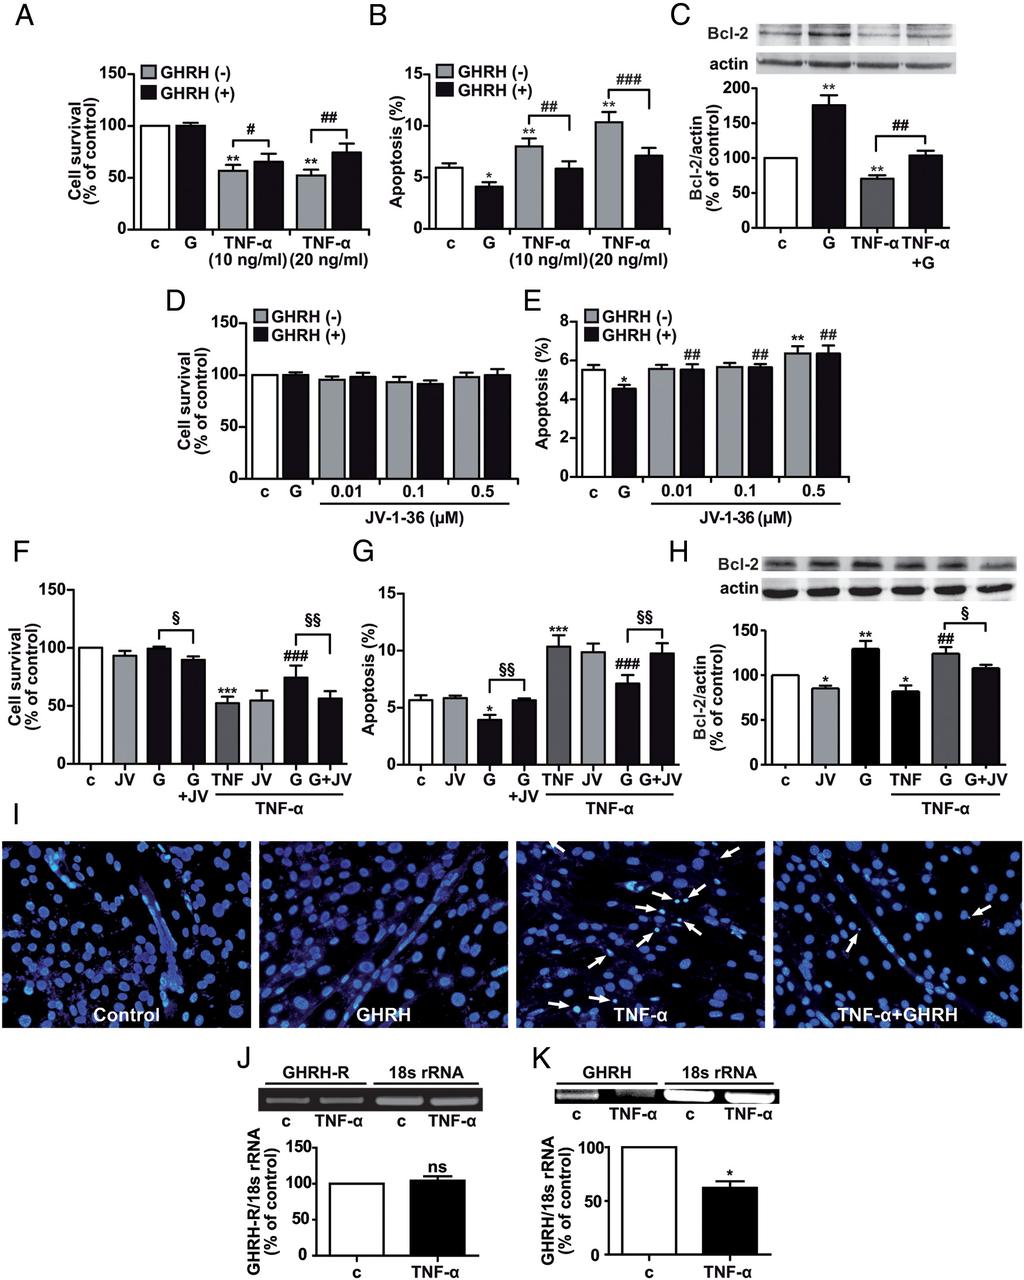 doi: 10.1210/EN.2015-1098 press.endocrine.org/journal/endo 3245 Figure 3. GHRH survival and antiapoptotic effects in C2C12 myotubes treated with TNF-.